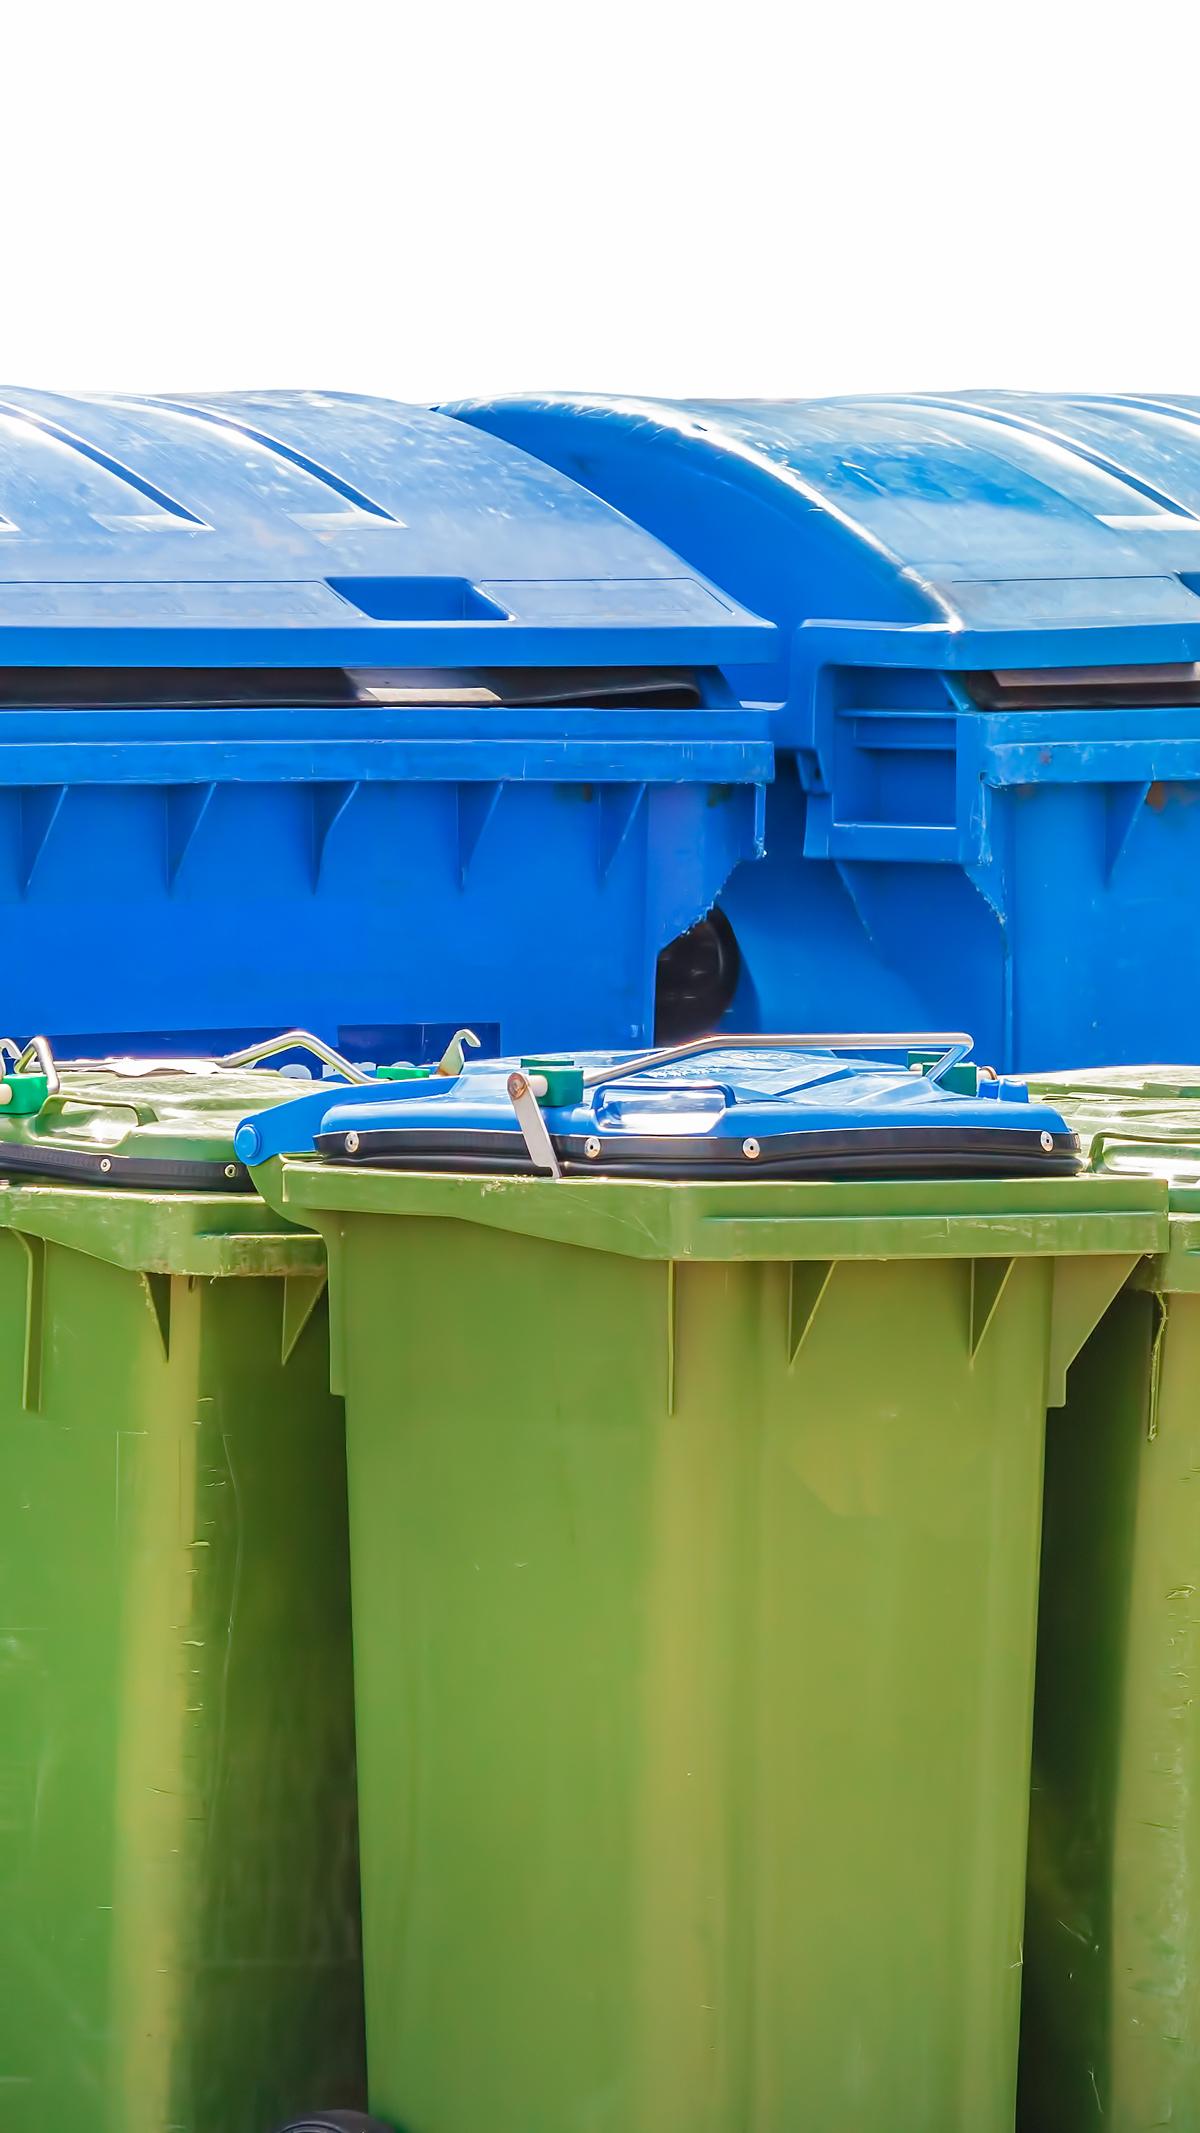 blue and green waste containers